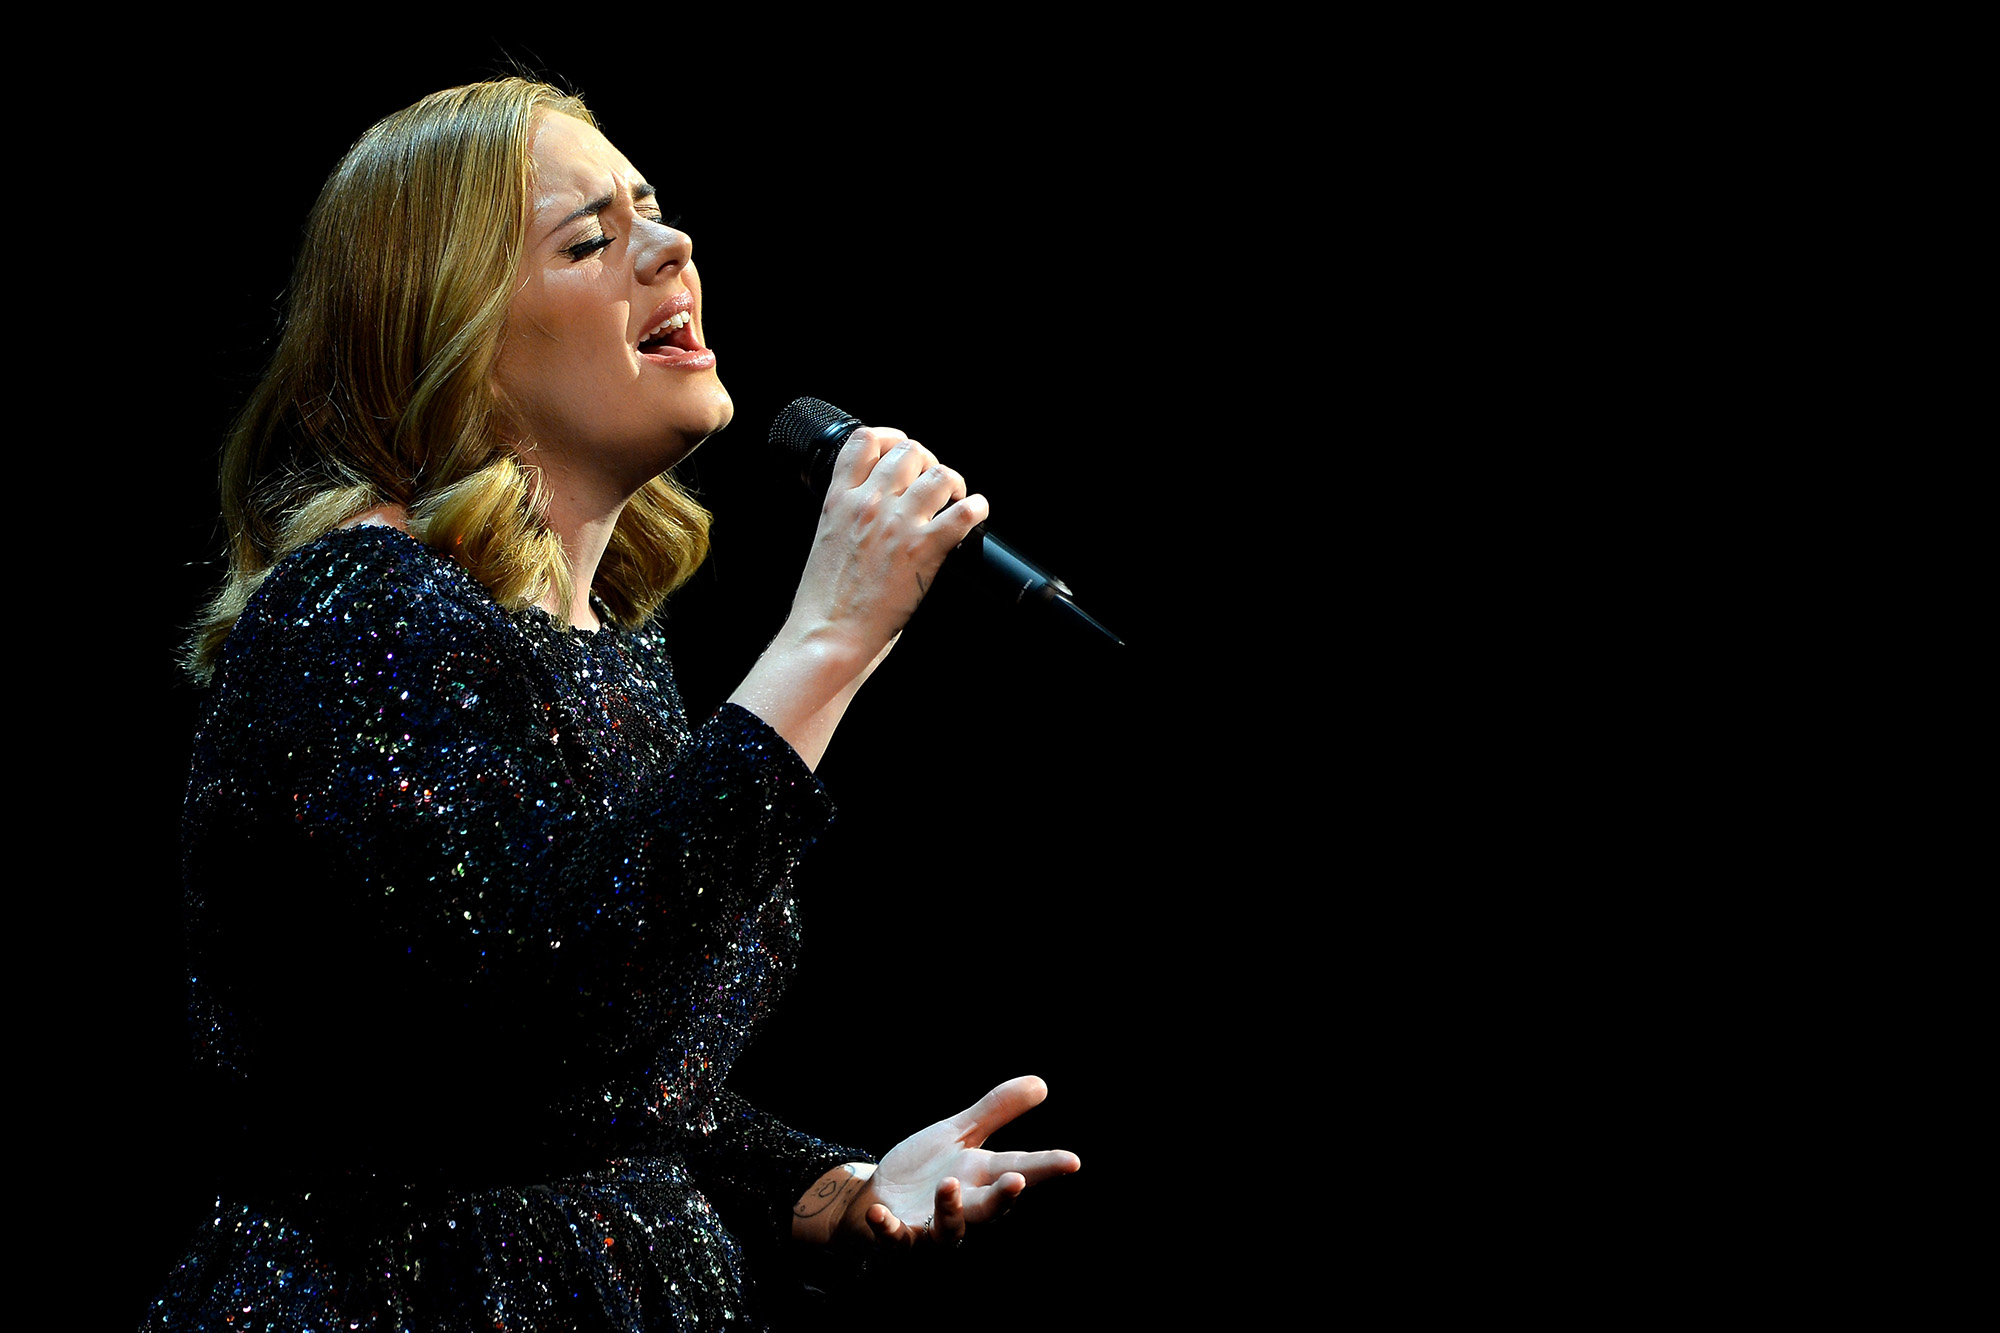 Adele Performs At The Sportpaleis, Antwerp